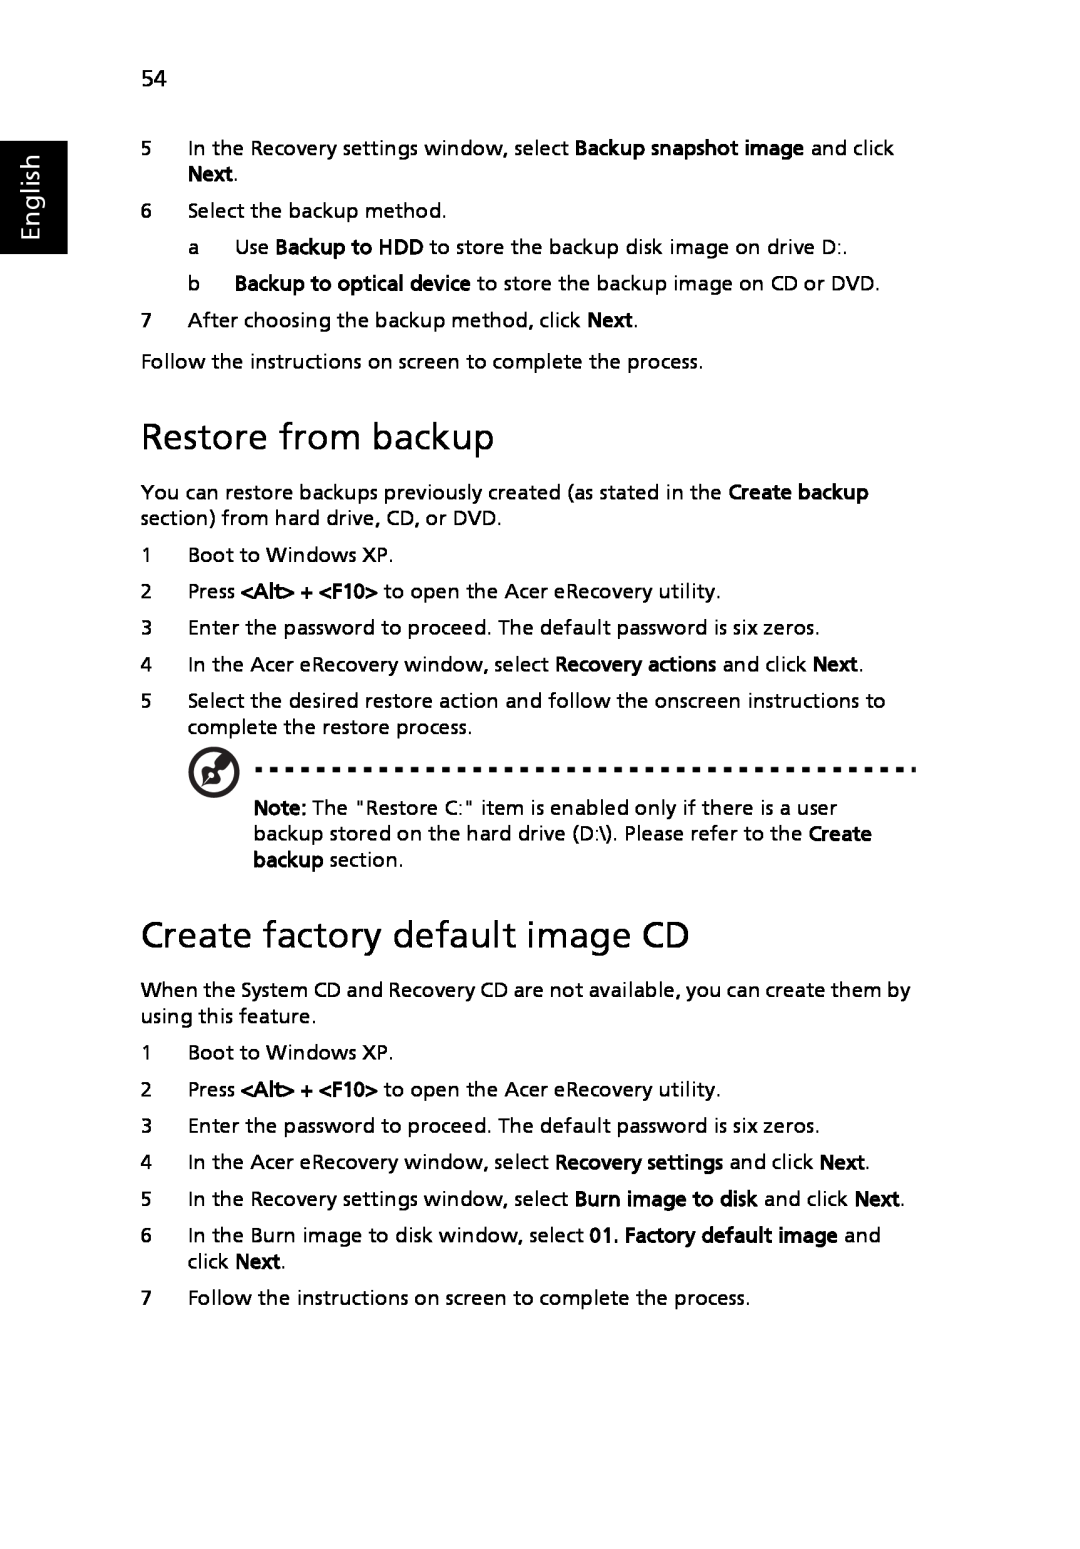 Acer 3630 manual Restore from backup, Create factory default image CD, English 